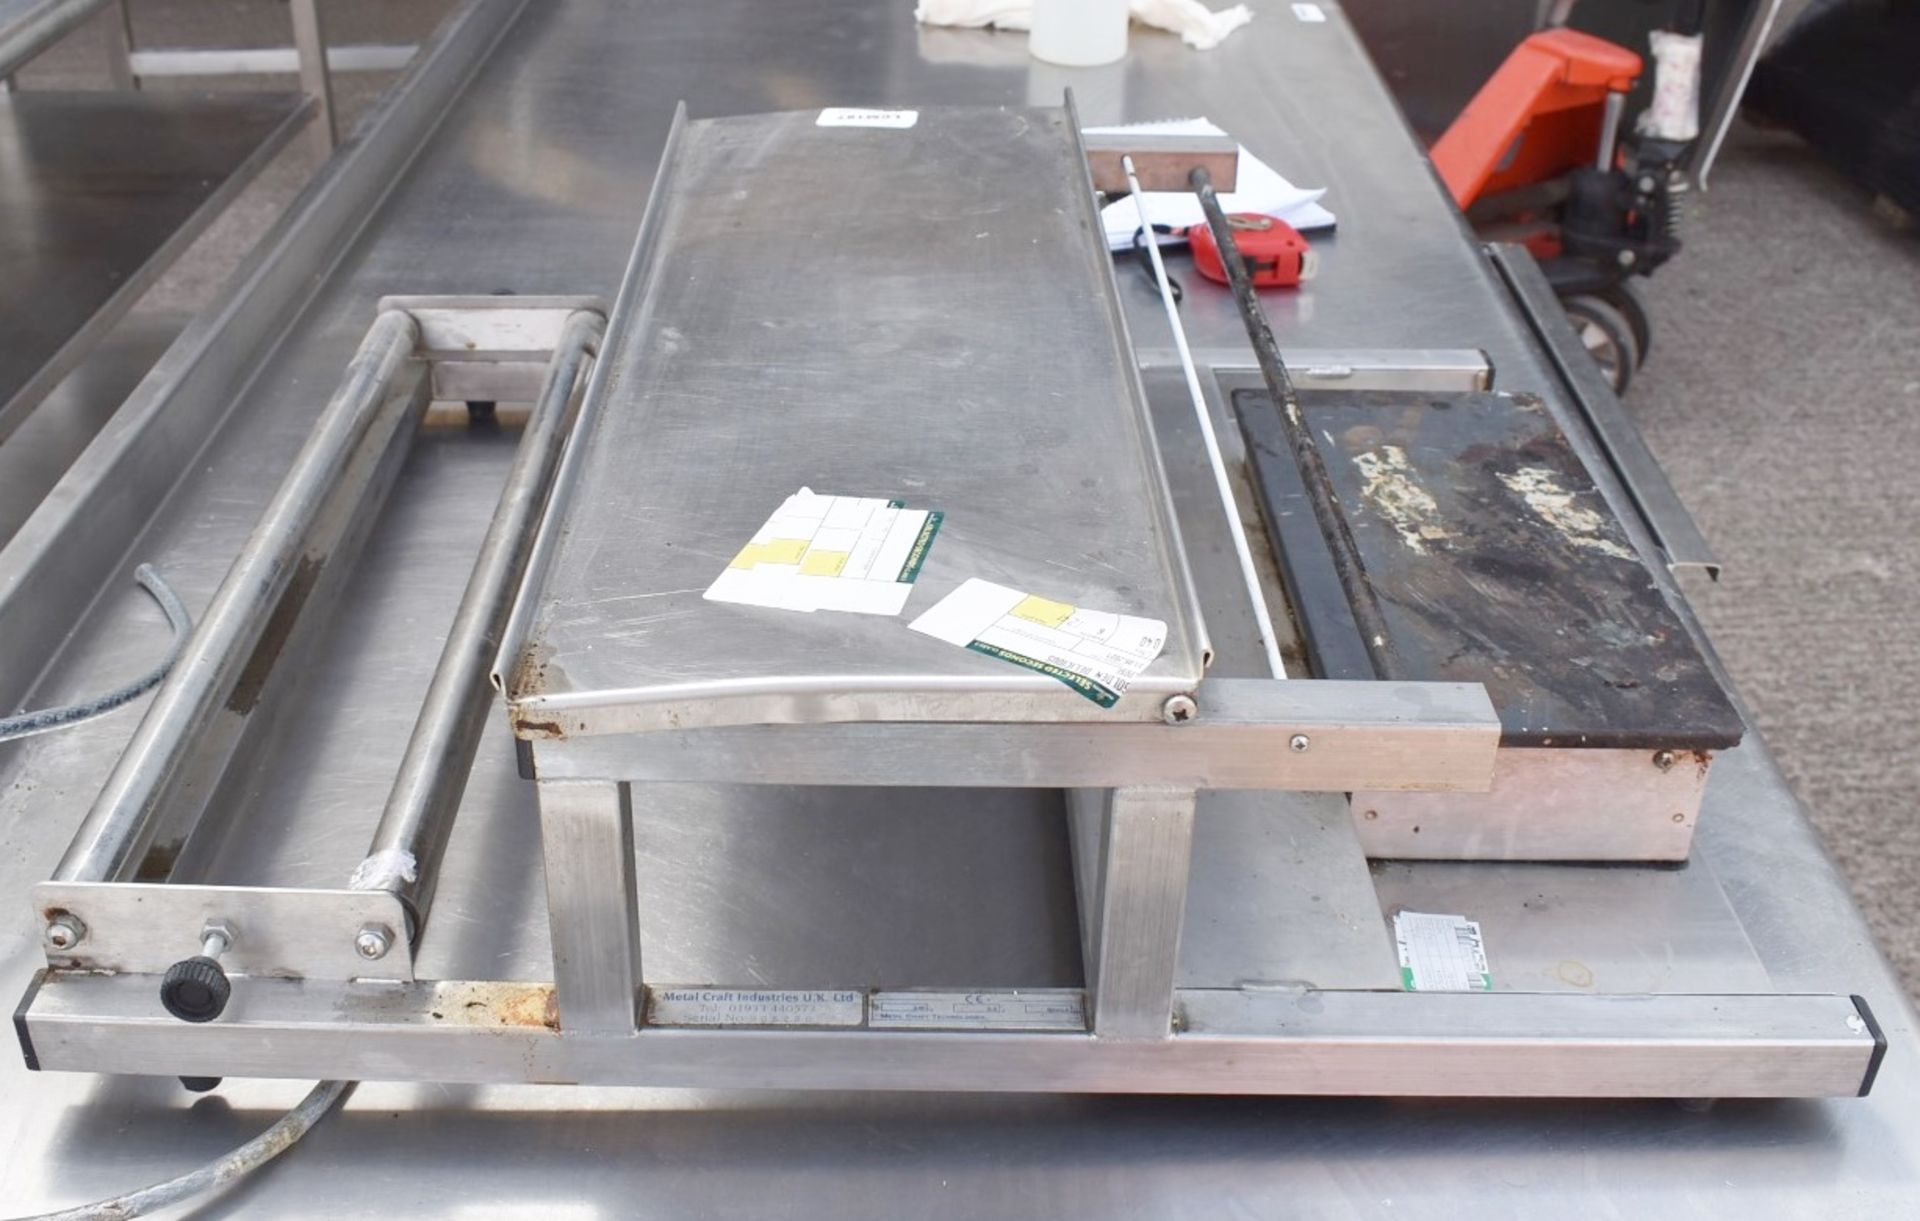 1 x Countertop Food Tray Wrapper Unit For Heat Sealed Wrapping - 56cm Wide - 240v - Recently Removed - Image 5 of 7